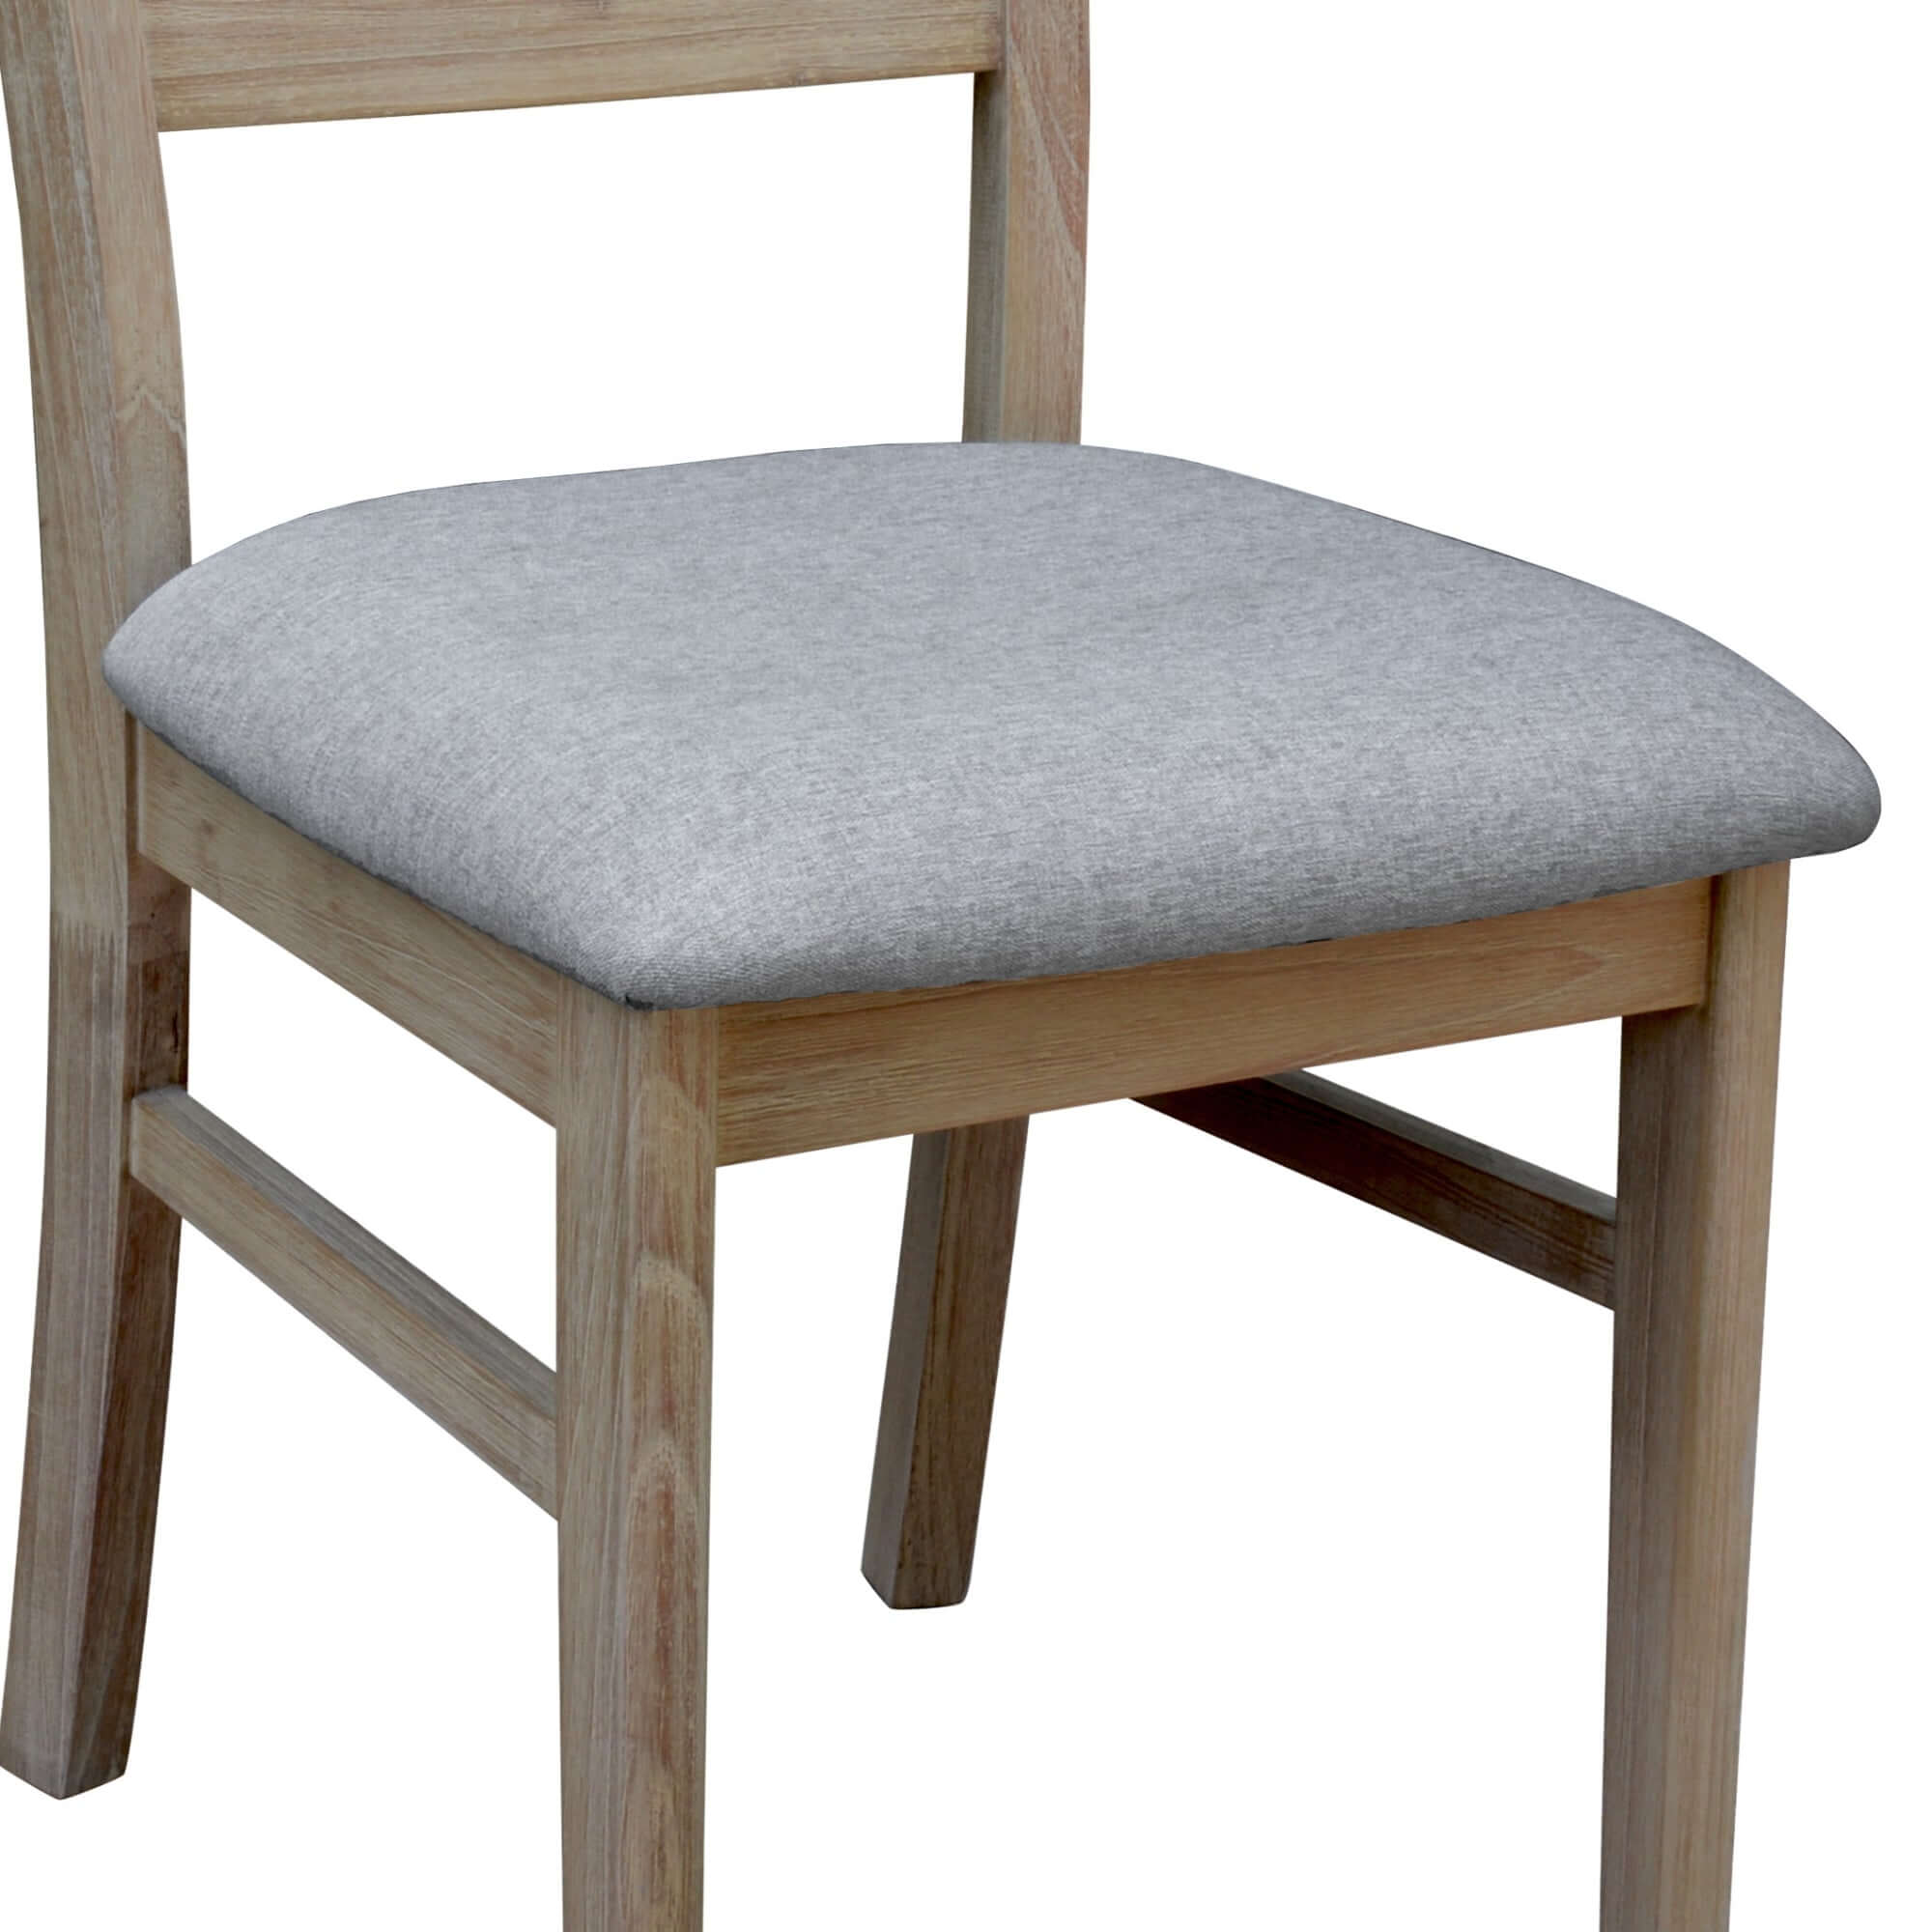 Tyler 4pc Solid Acacia Dining Chairs - Brushed Smoke-Upinteriors